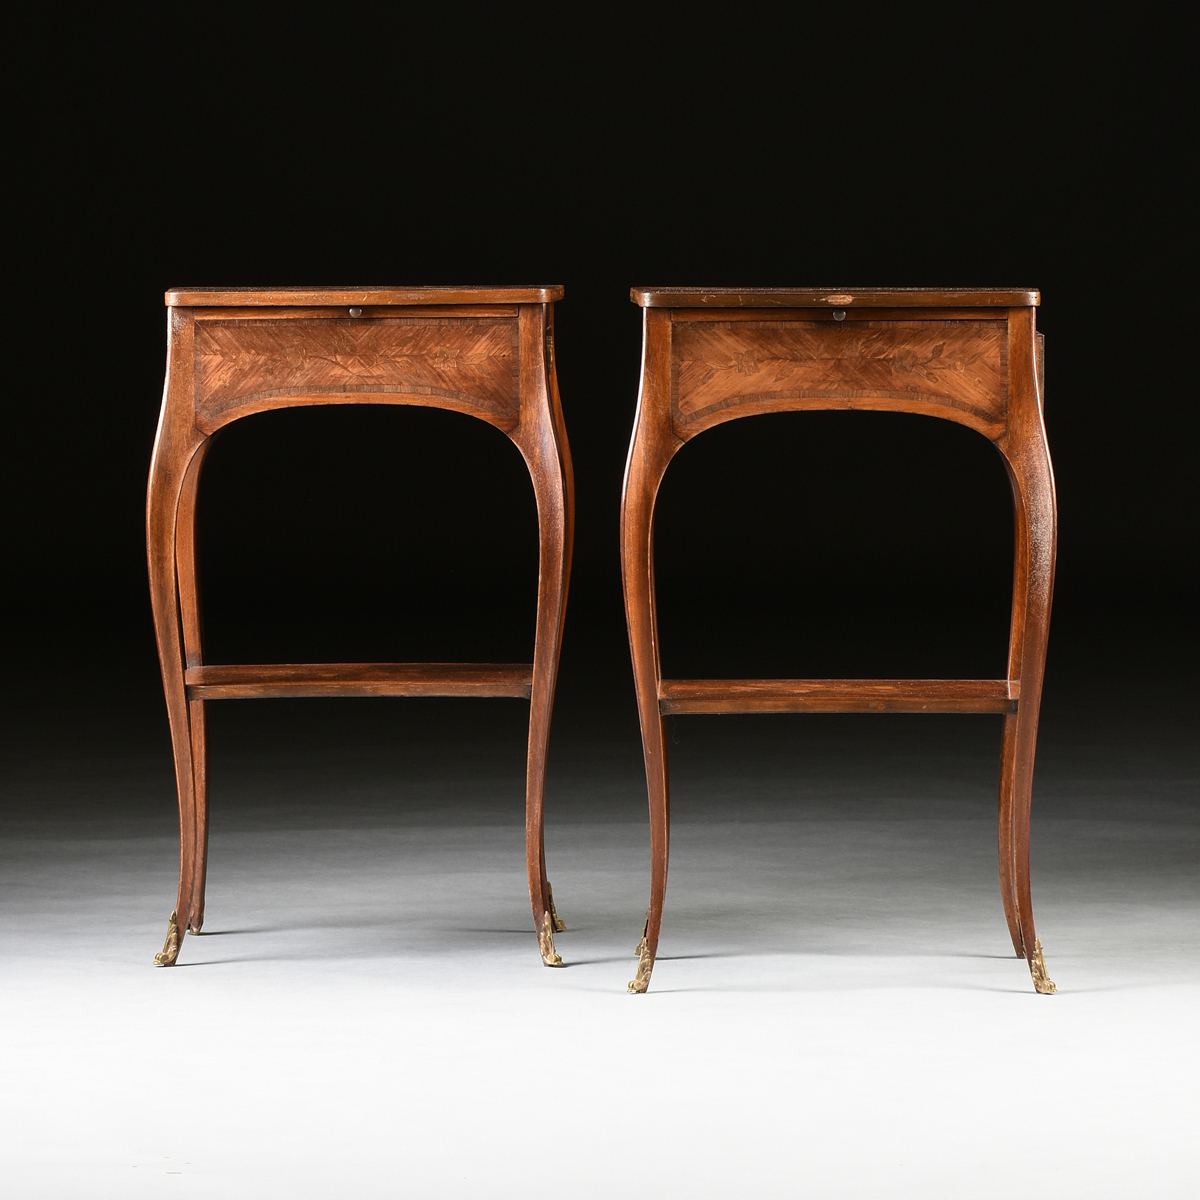 A PAIR OF LOUIS XV STYLE TULIPWOOD AND MARQUETRY INLAID TABLES Ã€ Ã‰CRIRE, LATE 19TH/EARLY - Image 2 of 11